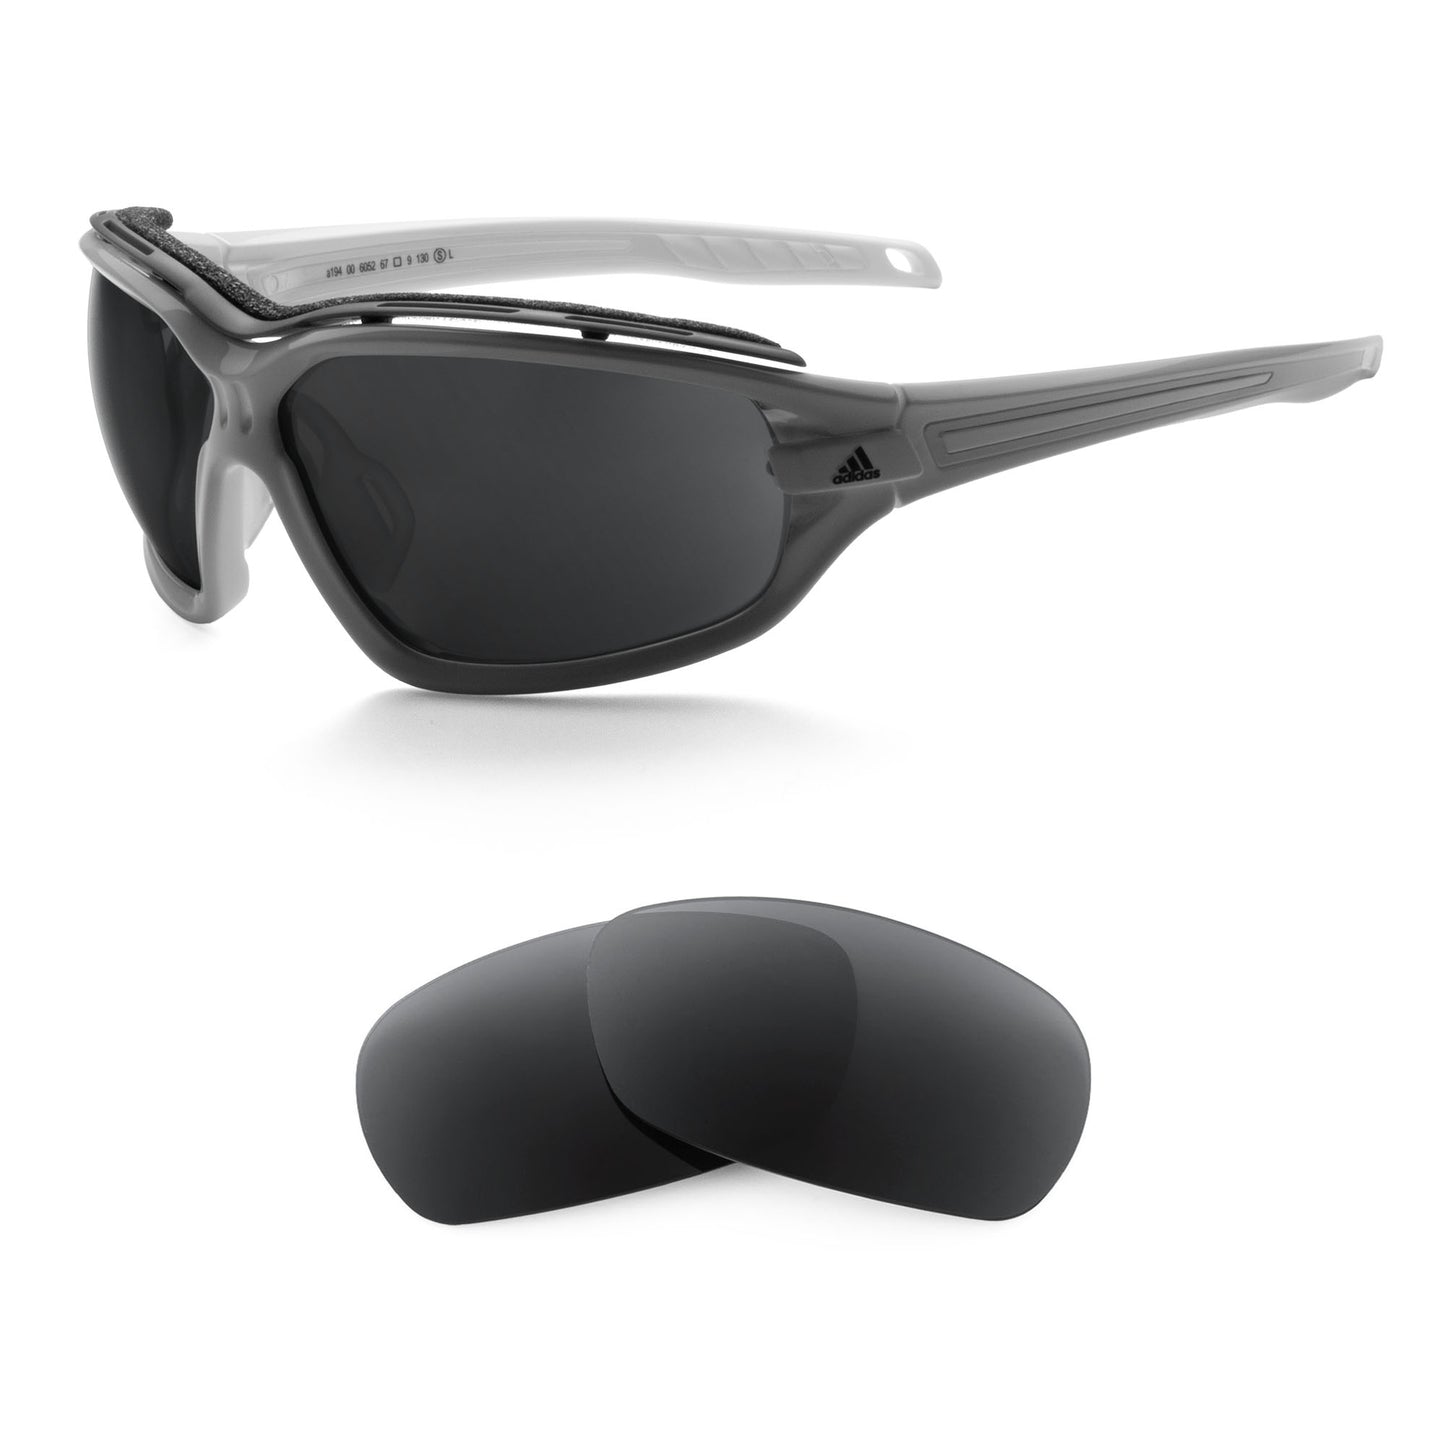 Adidas Evil Eye Pro S A194 sunglasses with replacement lenses